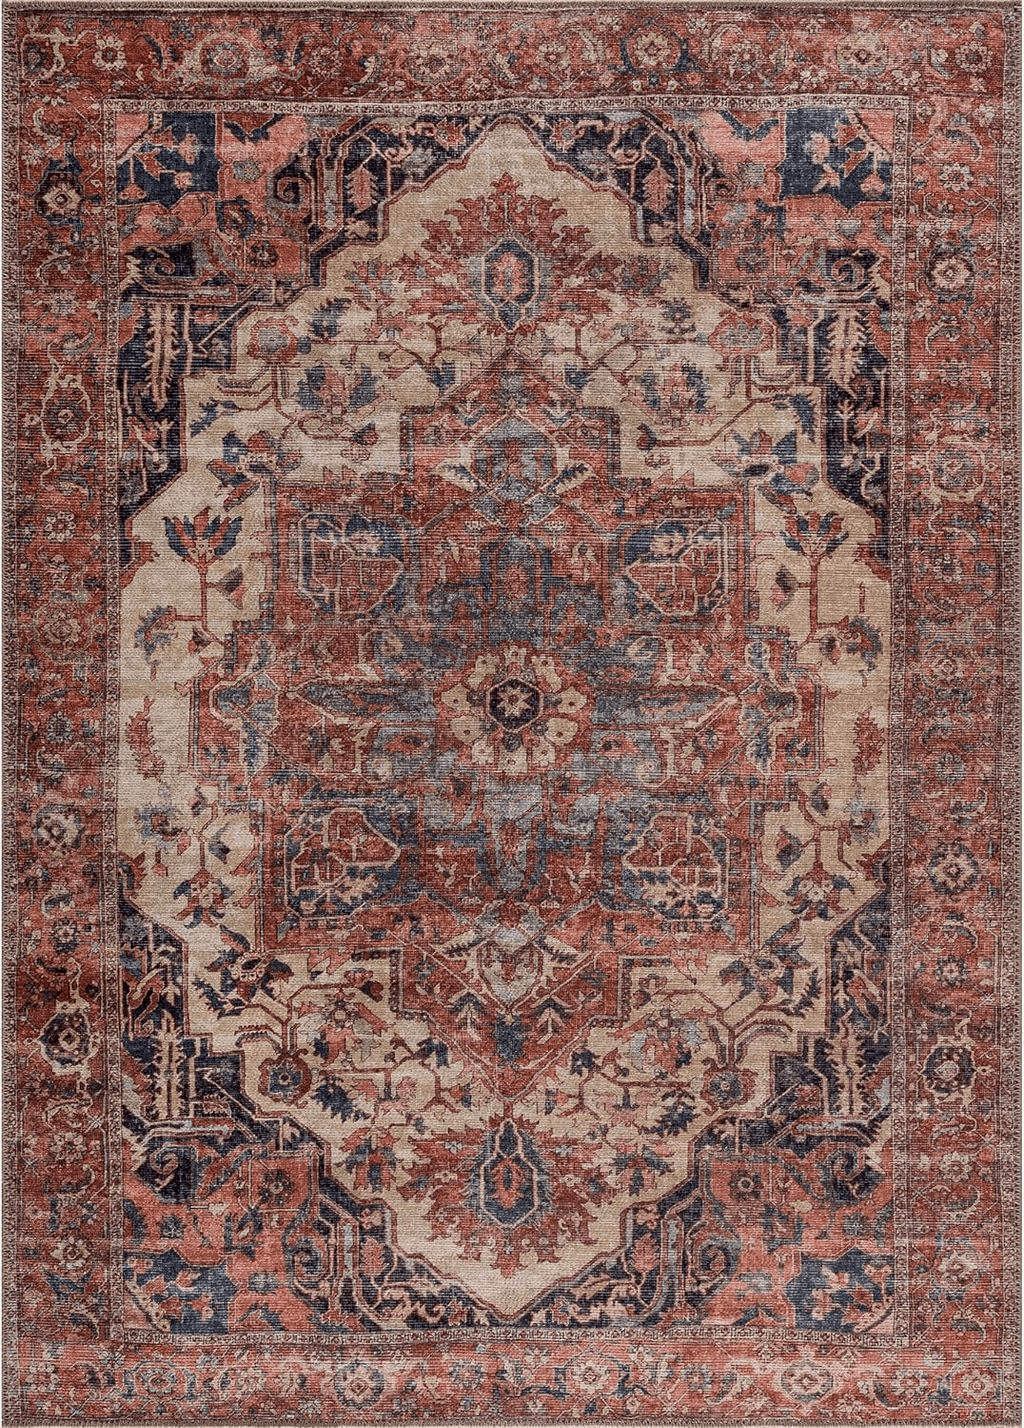 Kilim Bloom Rugs Washable 3' x 5' Rug - Beige/Terracotta Traditional Area Rug for Living Room, Bedroom, Dining Room, and Kitchen - Exact Size: 3' x 5'